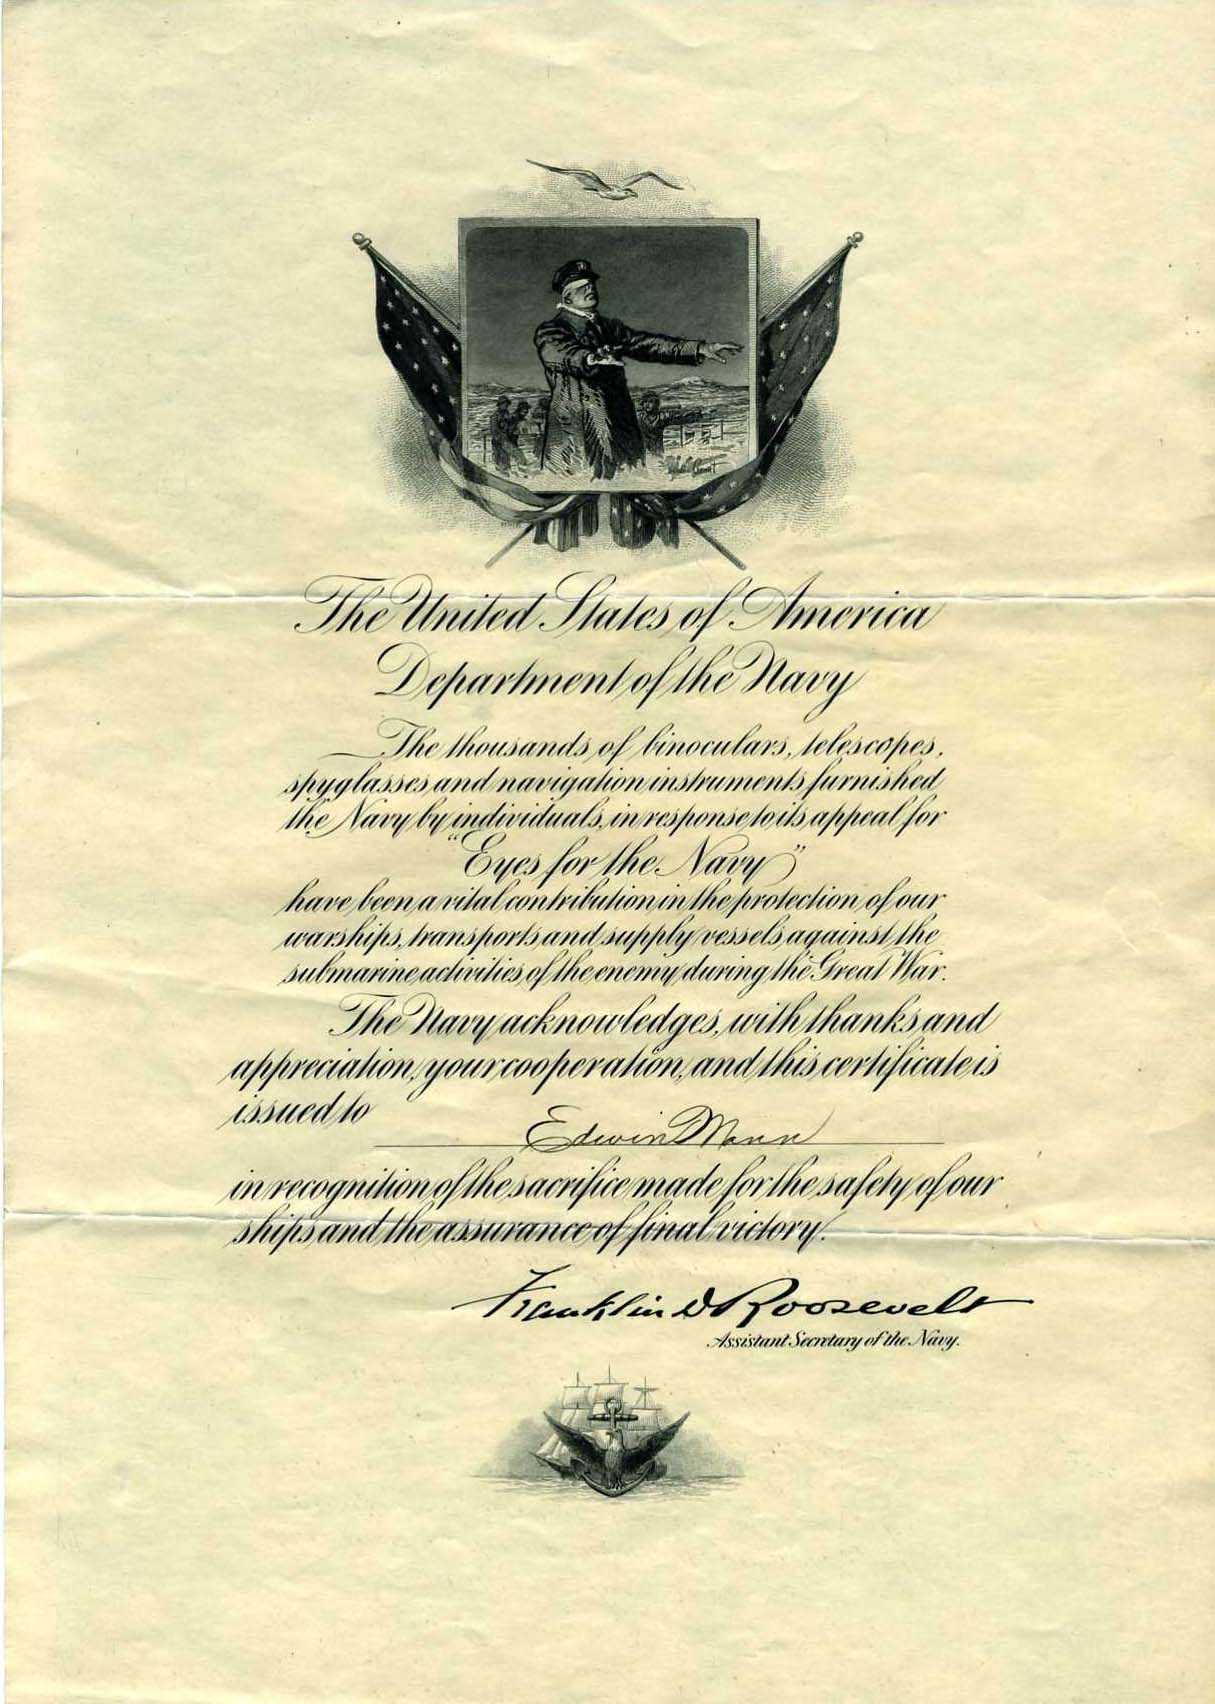 a vintage pograph of a document from the late 1800's